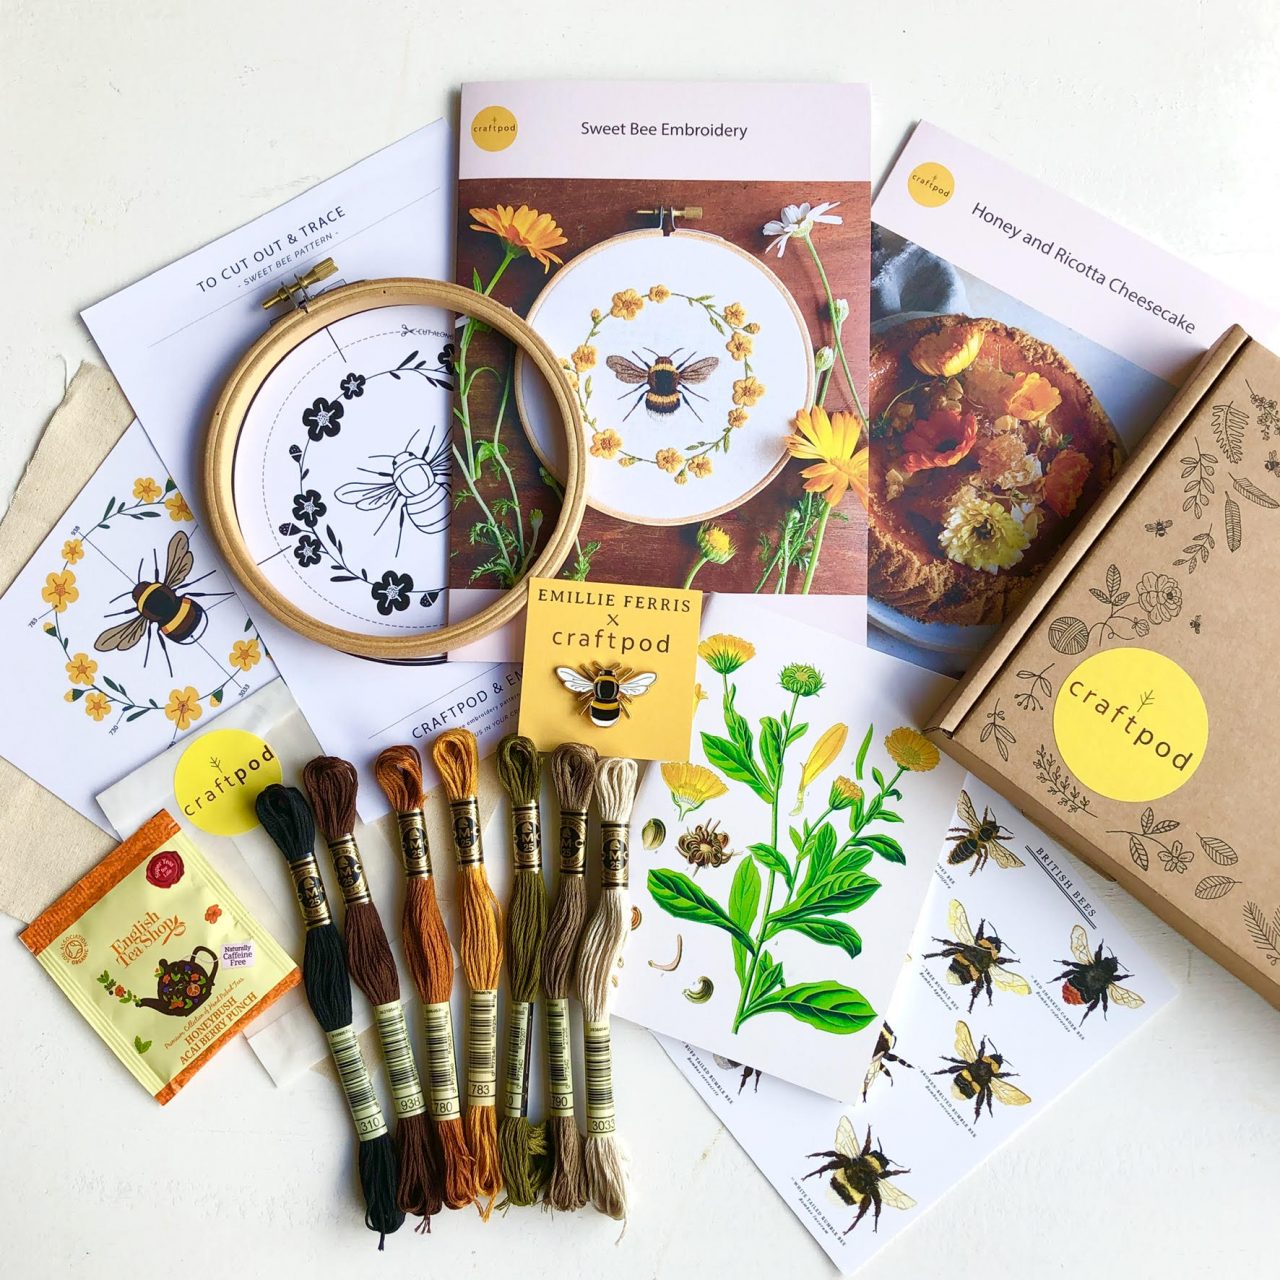 Craftpod craft subscription box nominated for best product at the Mollie Makes Handmade Awards 2019